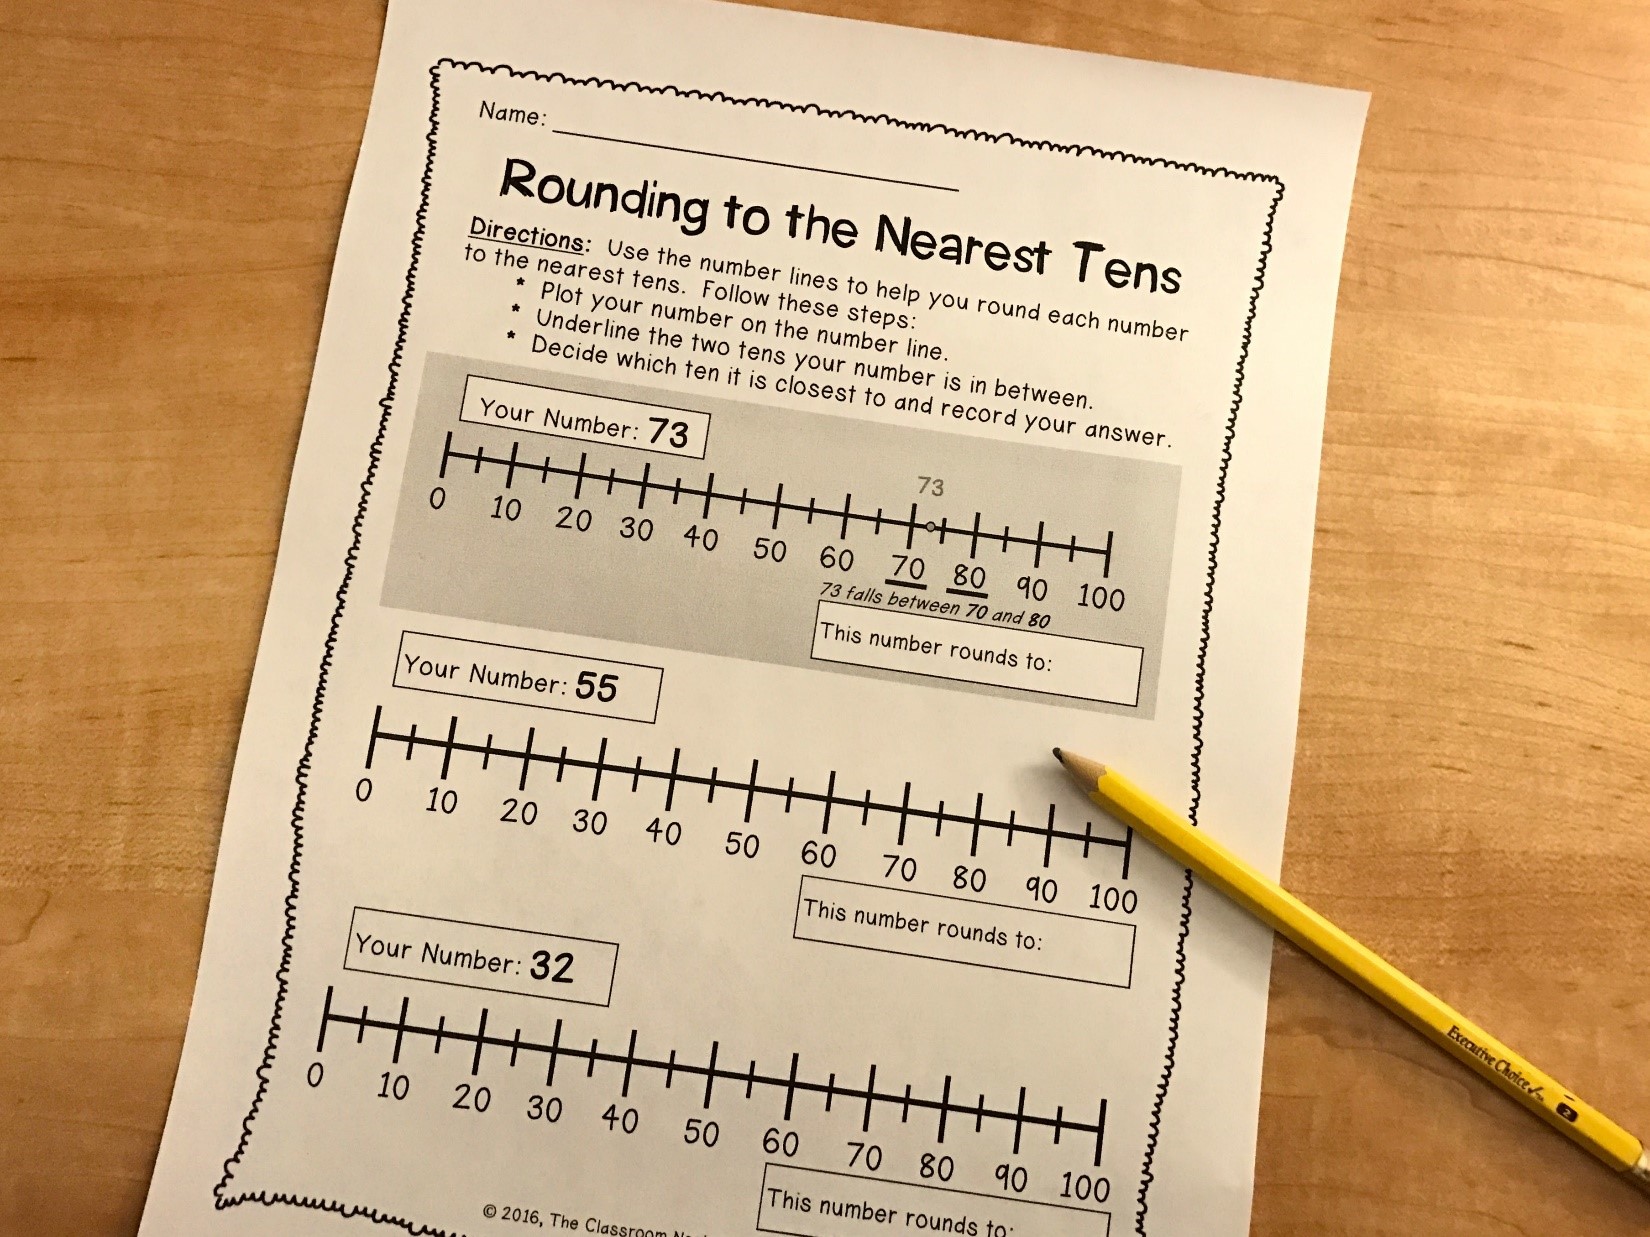 Rounding to the nearest Tens